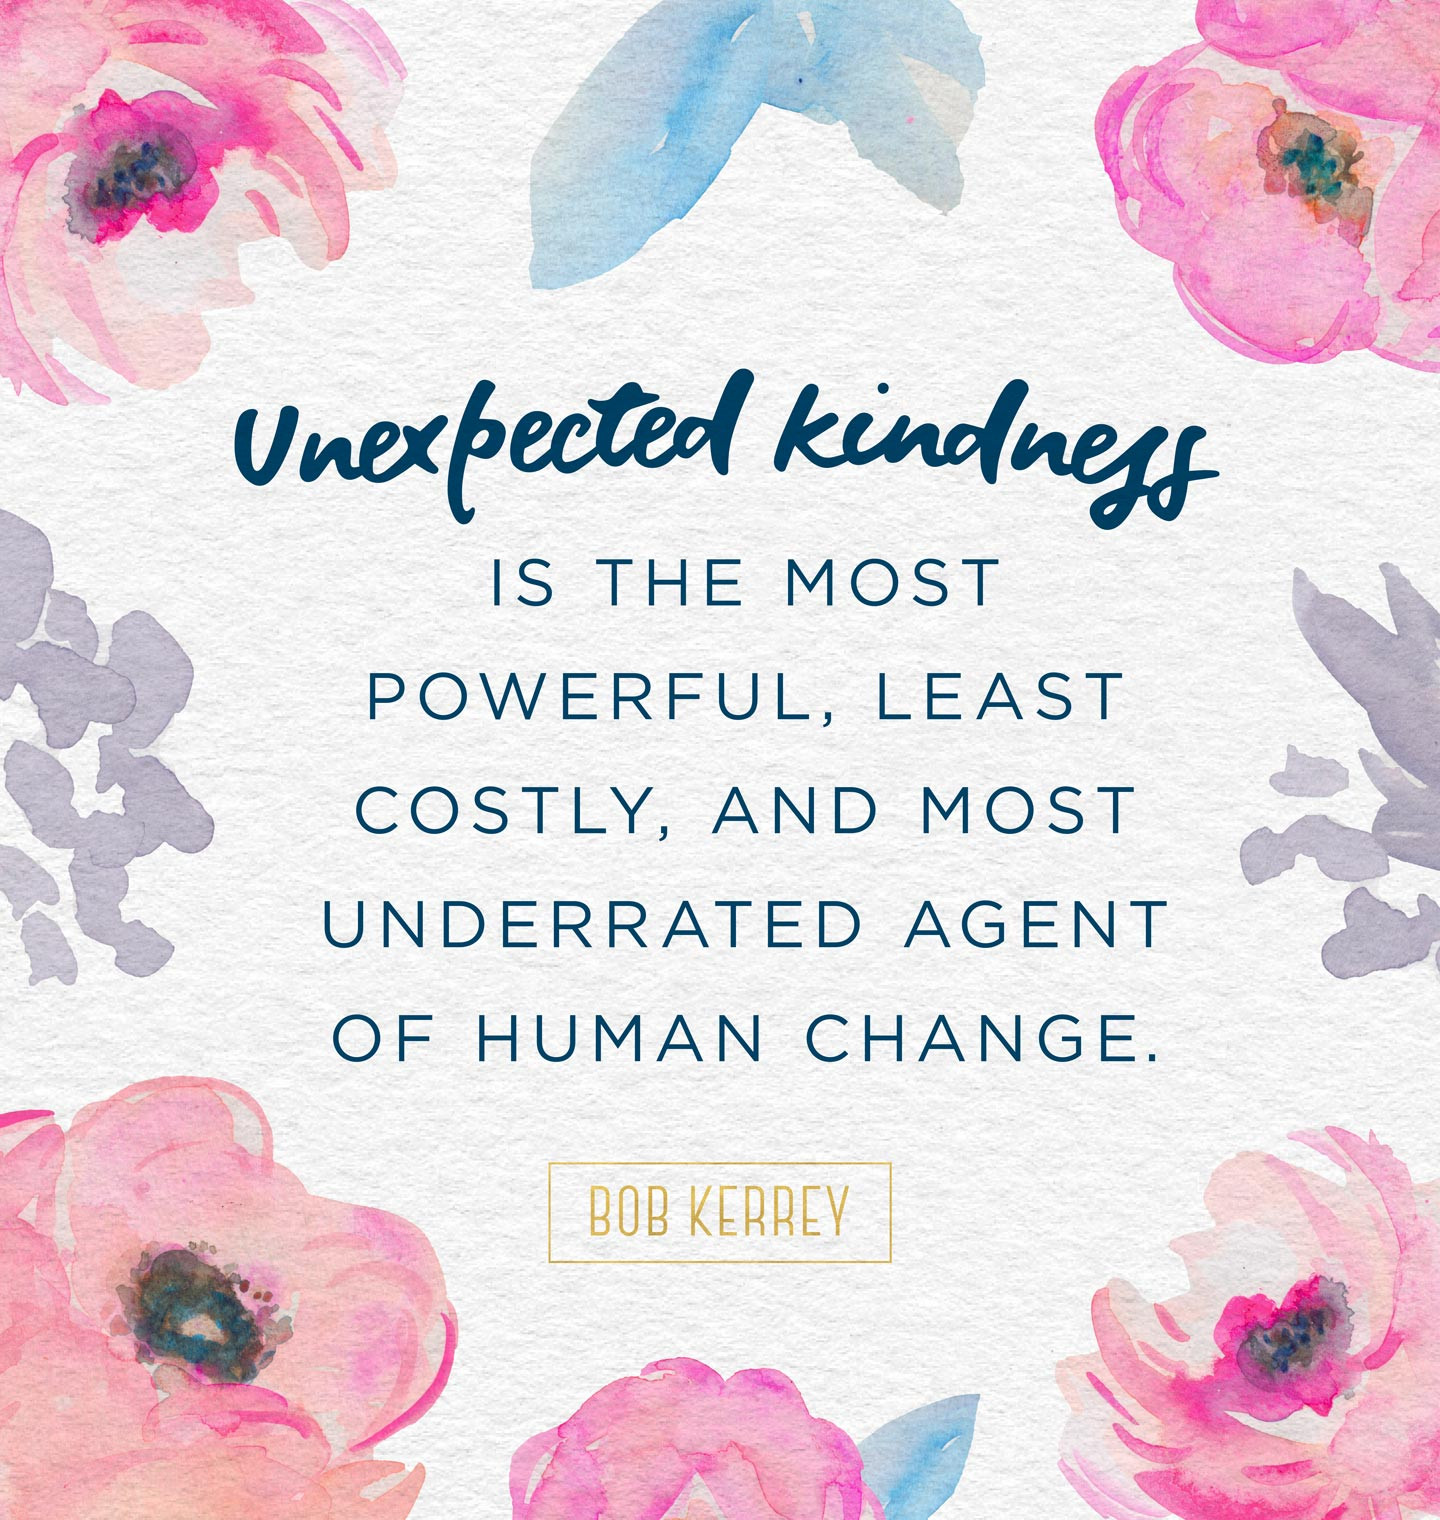 Quotes On Kindness
 30 Inspiring Kindness Quotes That Will Enlighten You FTD